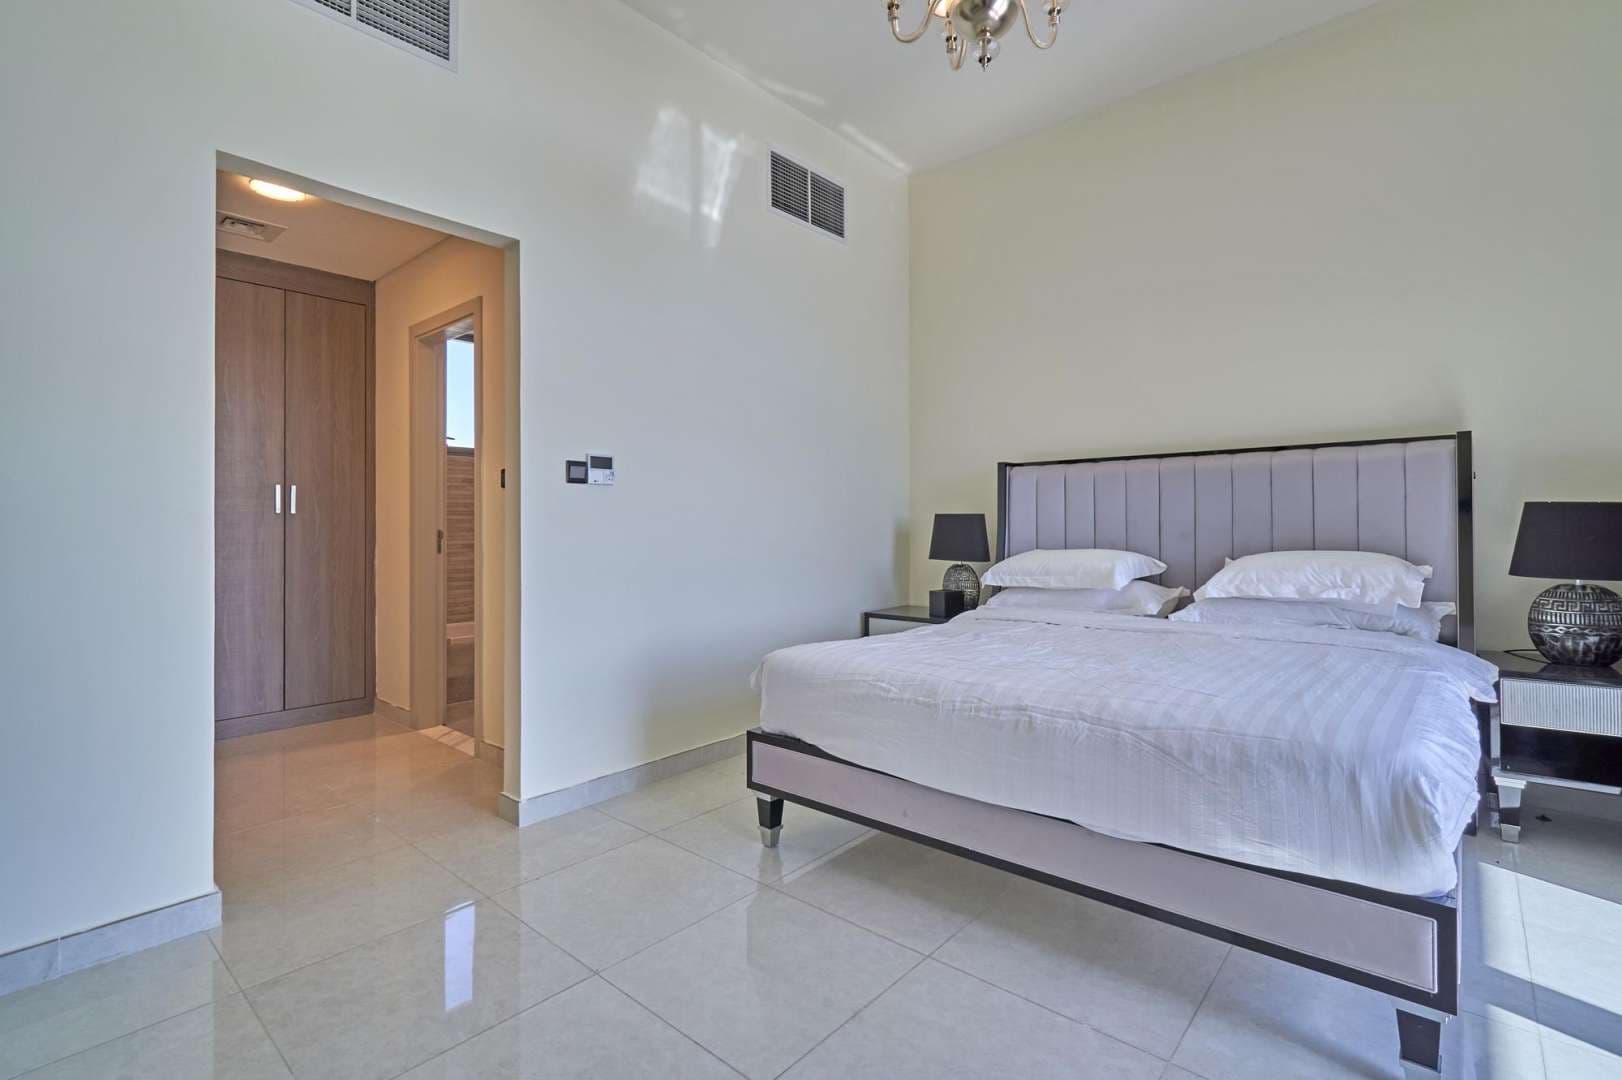 2 Bedroom Penthouse For Rent The Polo Residence Lp05454 6c53cfa165f9000.jpg